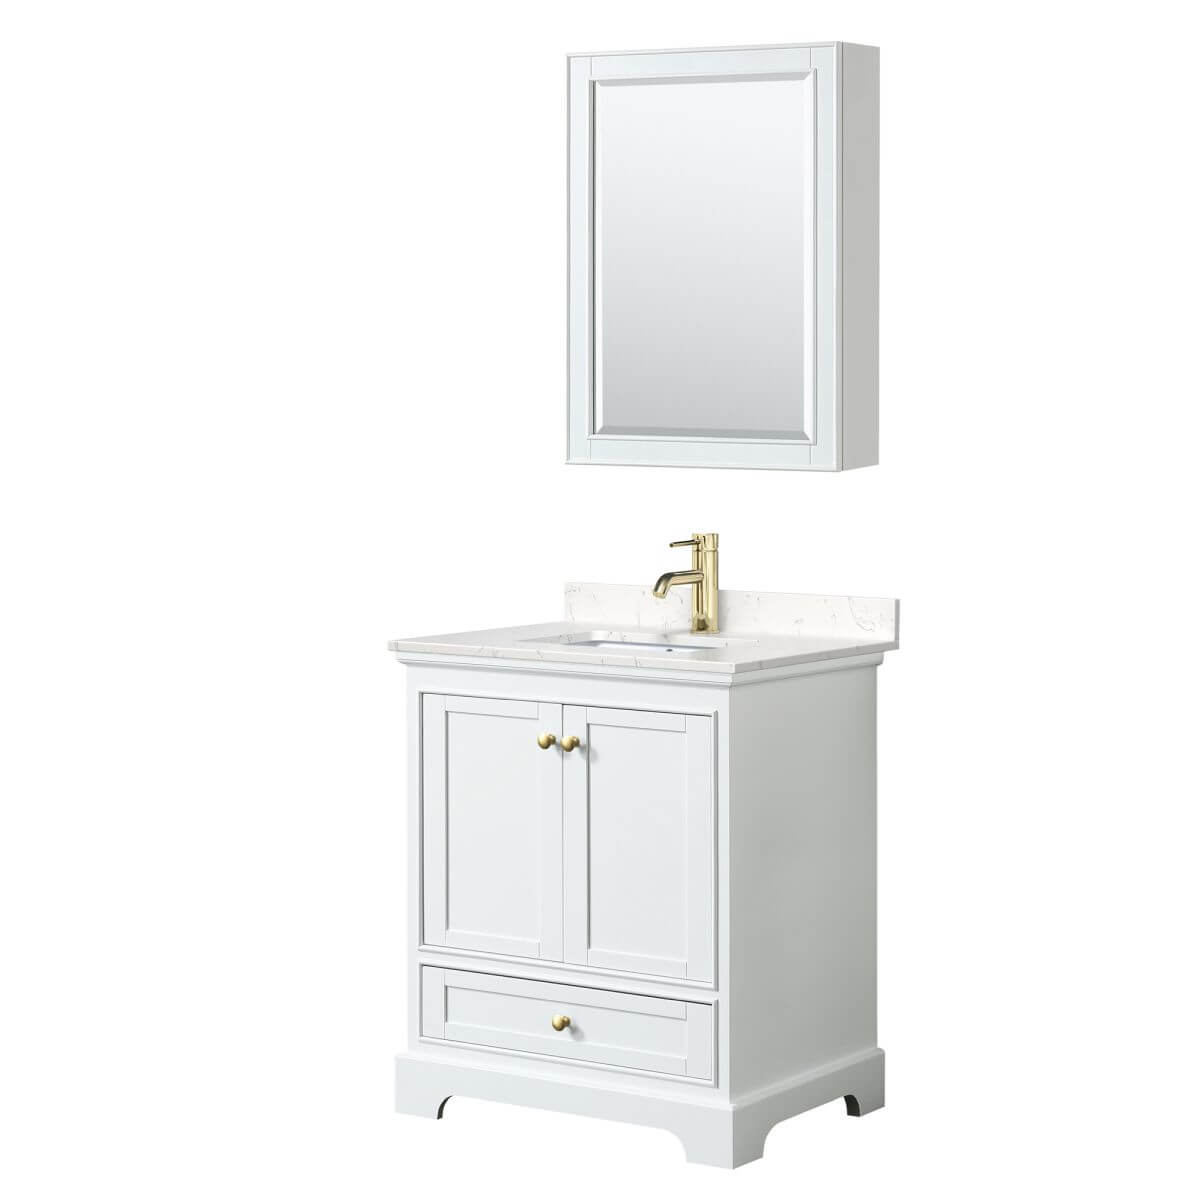 Wyndham Collection Deborah 30 inch Single Bathroom Vanity in White with Carrara Cultured Marble Countertop, Undermount Square Sink, Brushed Gold Trim and Medicine Cabinet - WCS202030SWGC2UNSMED